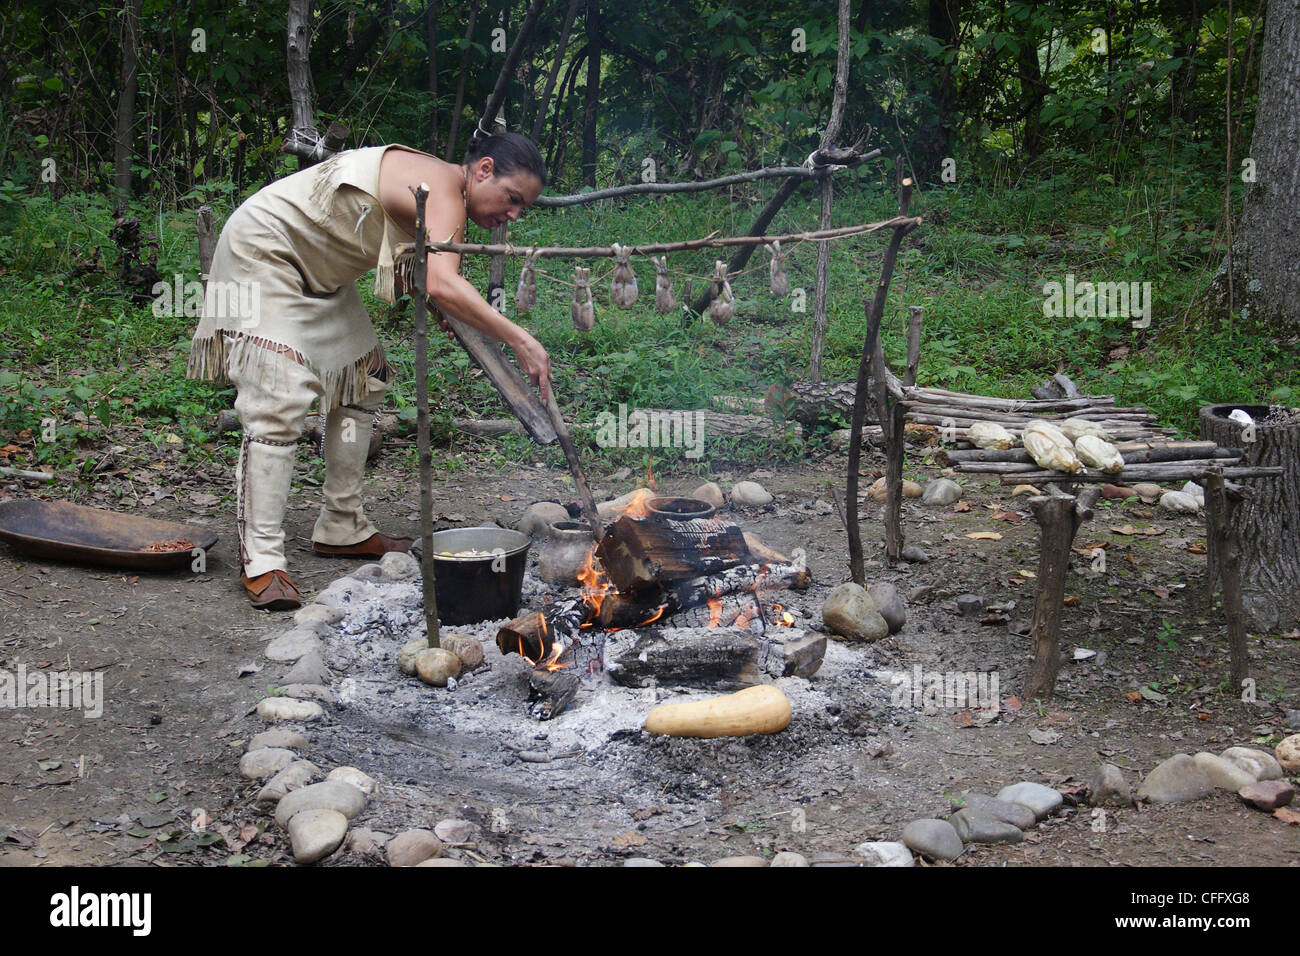 Native American woman cooking 17th century meal during Publick Days event at Henricus historical site in Virginia. Stock Photo